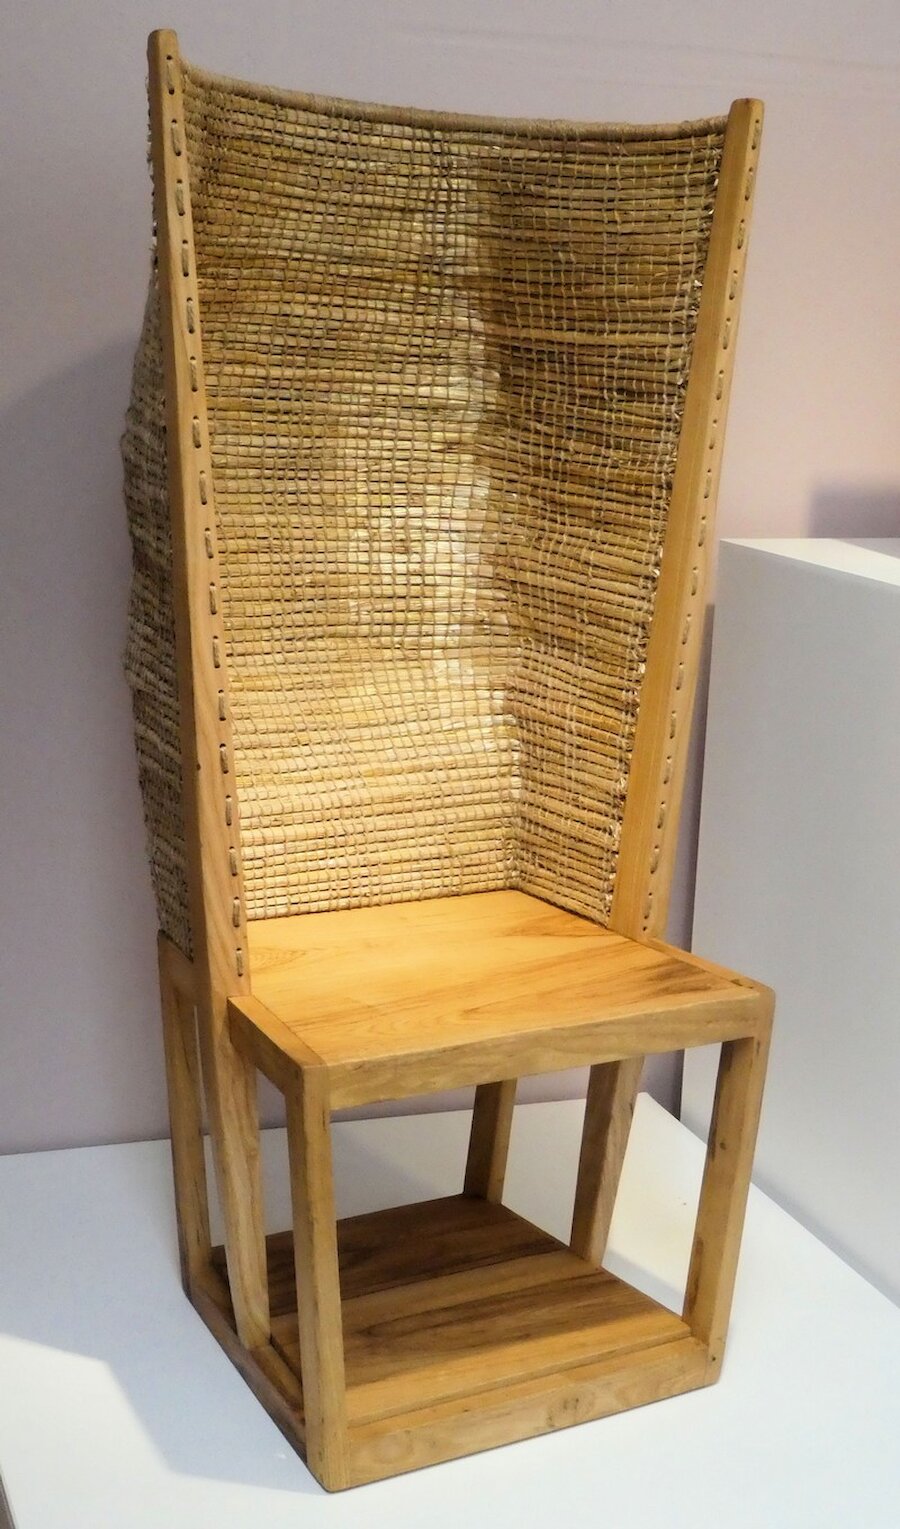 Strawback chairs like this are also part of the Fair Isle tradition. | Alastair Hamilton